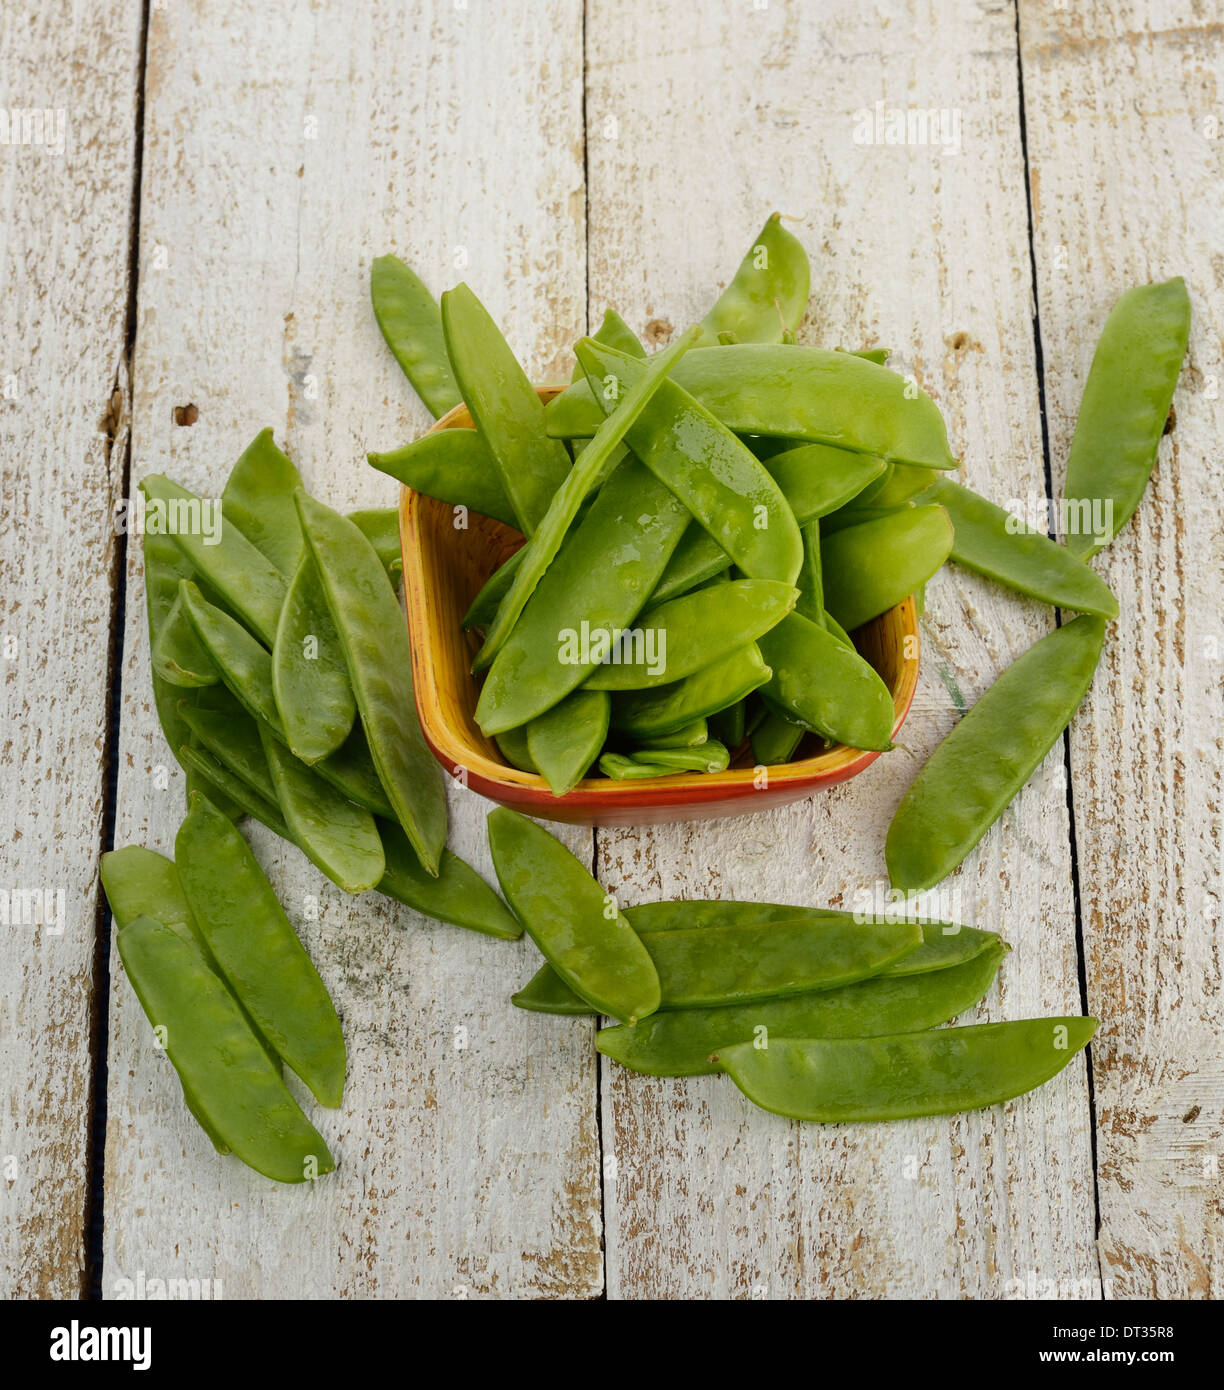 Edible Podded Peas In A Bowl Stock Photo